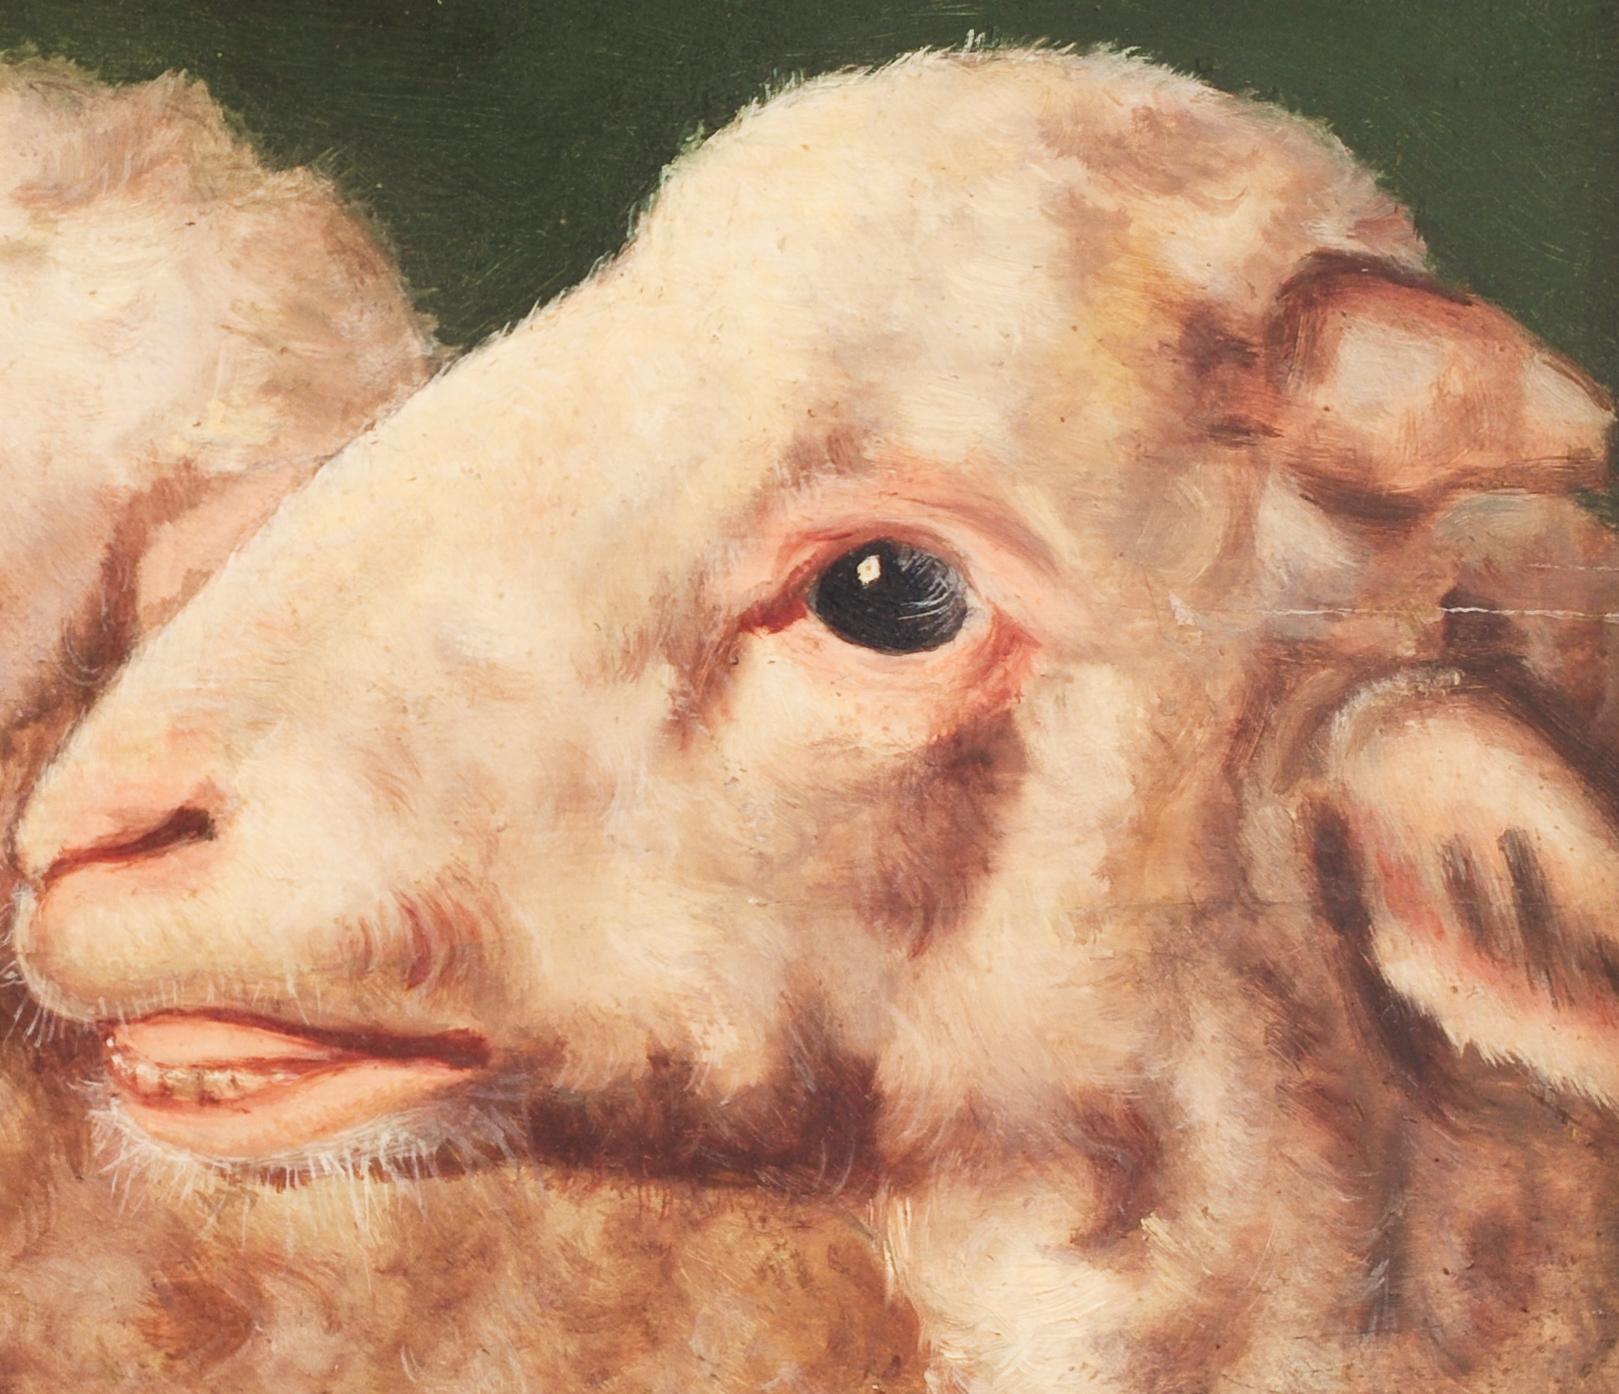 Eugène Verboeckhoven (1798-1881) (Attributed to)

Study of Two Sheep Heads

oil on panel
panel size 7.48 x 14.56 inches (19 x 37 cm)
fine condition
frame included

Provenance: 
Hampel Auctions Munich, Catalogue VI, Decorative objects & Hampel